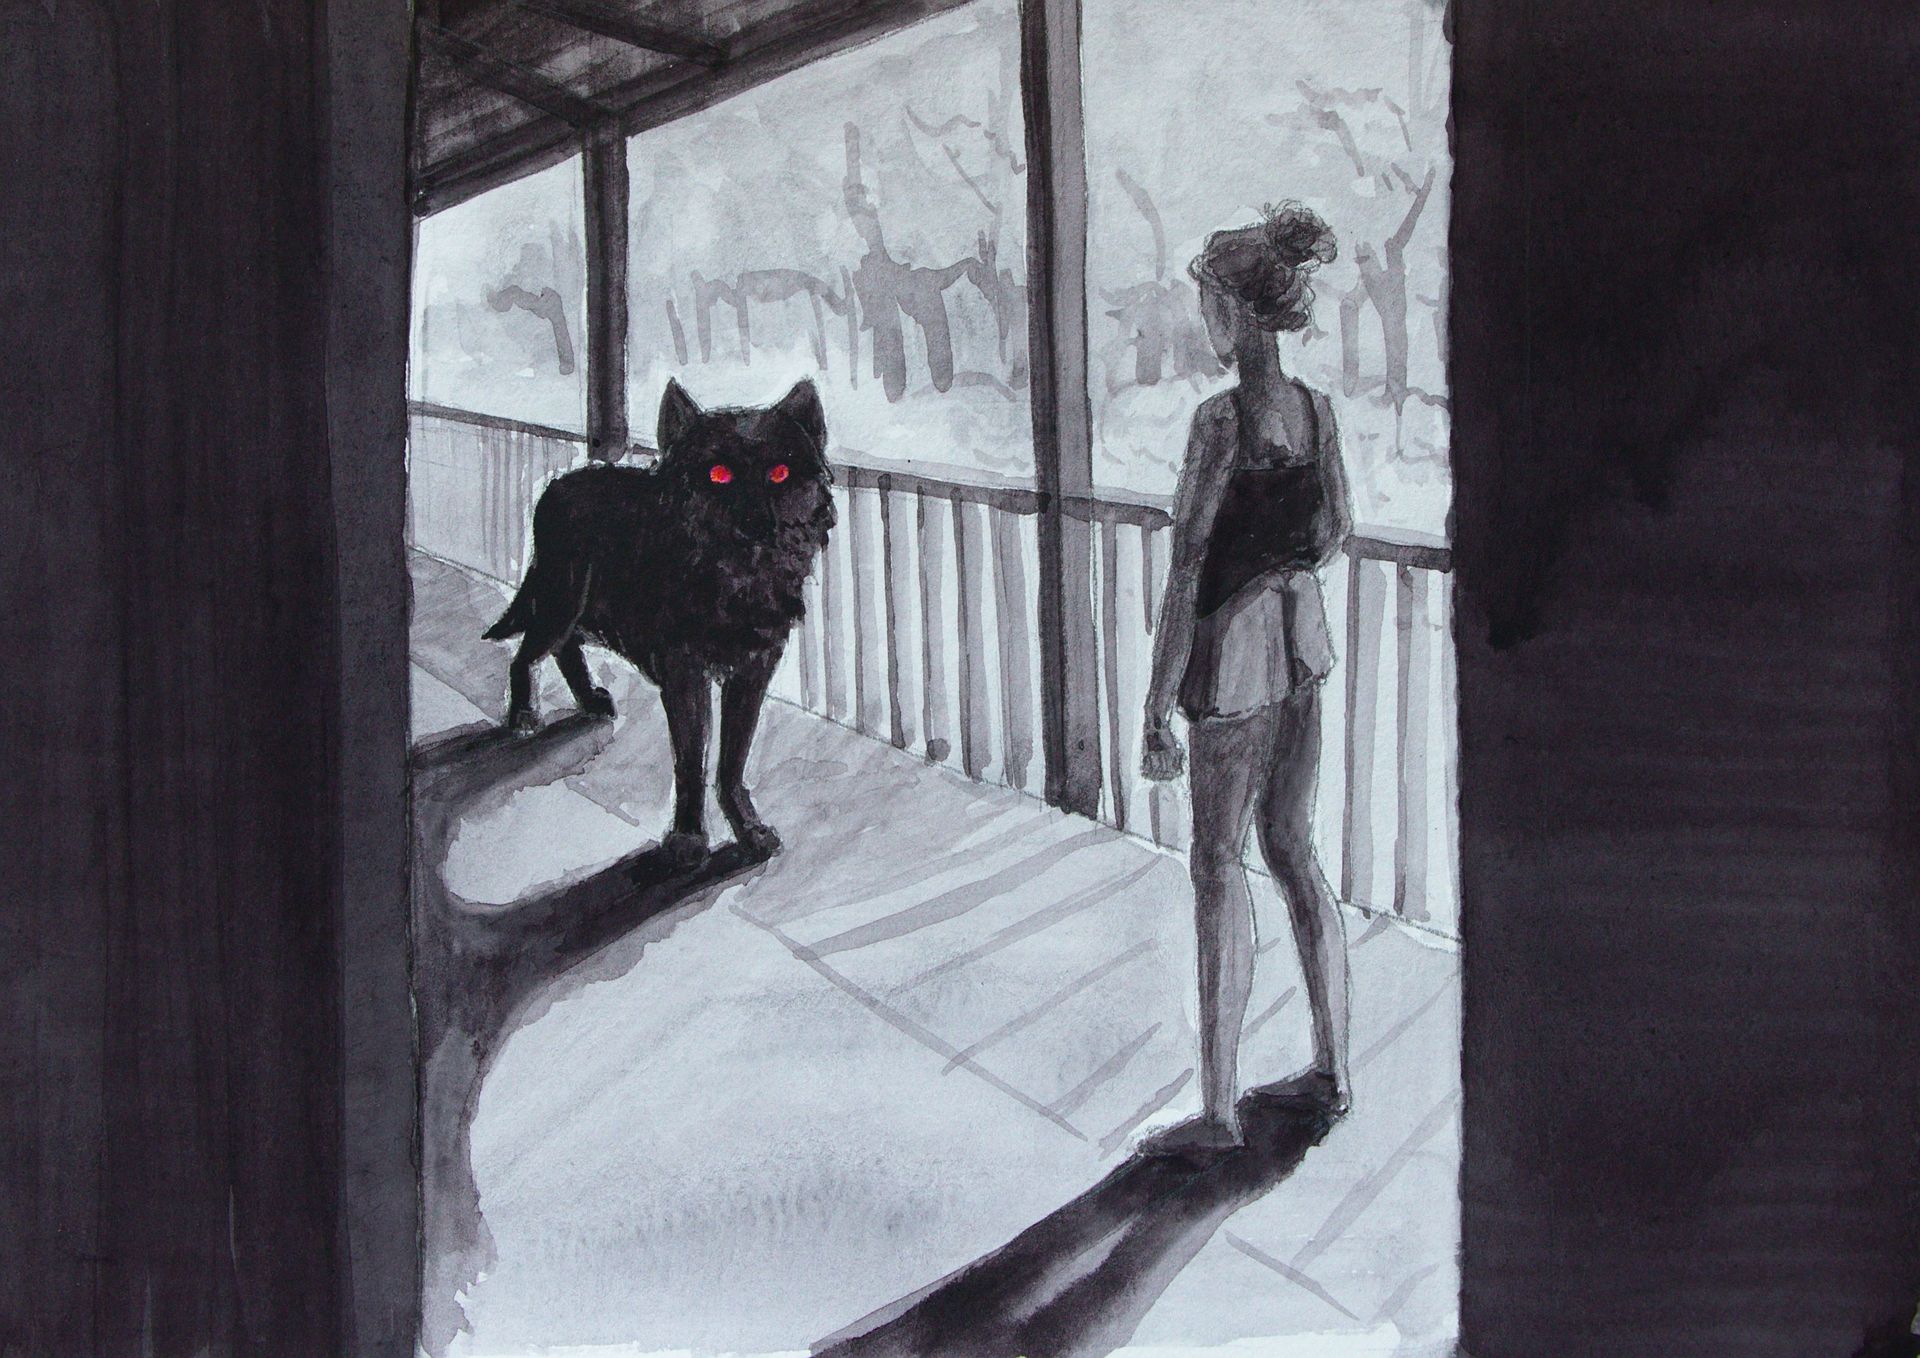 A girl and a large black wolf facing off on a porch.